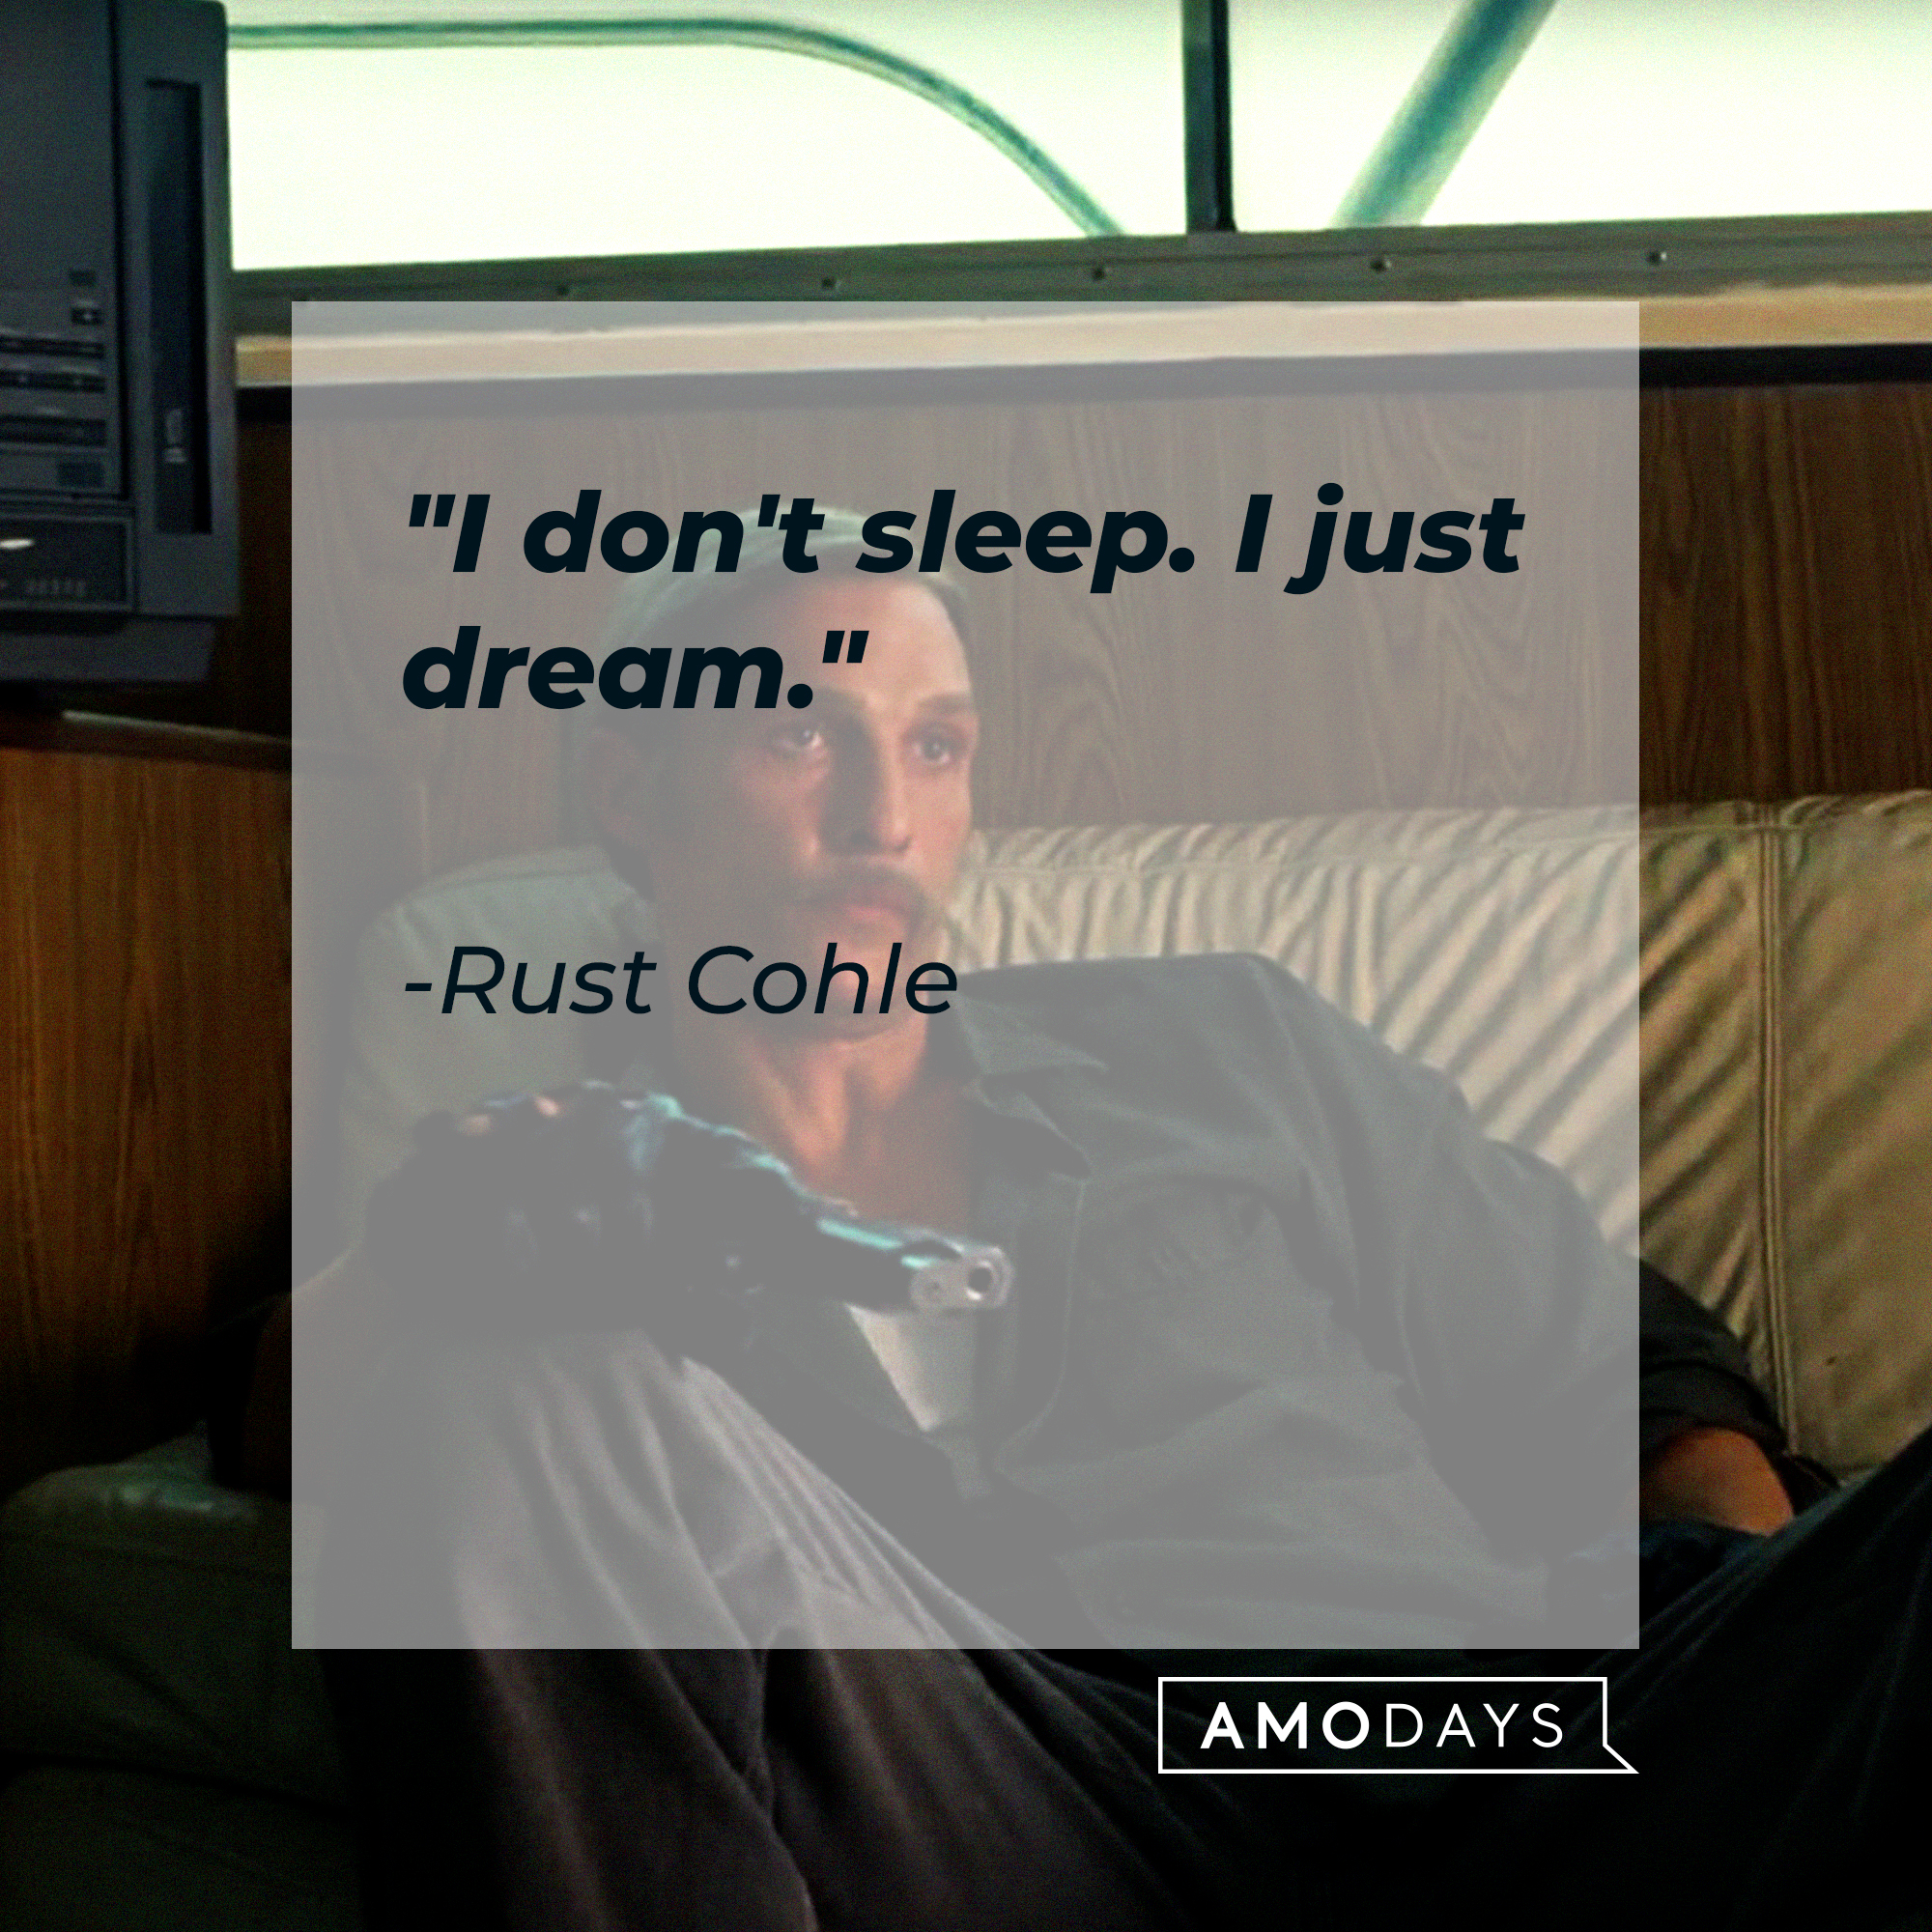 Rust Cohle's quote: "I don't sleep. I just dream." | Source: facebook.com/TrueDetective